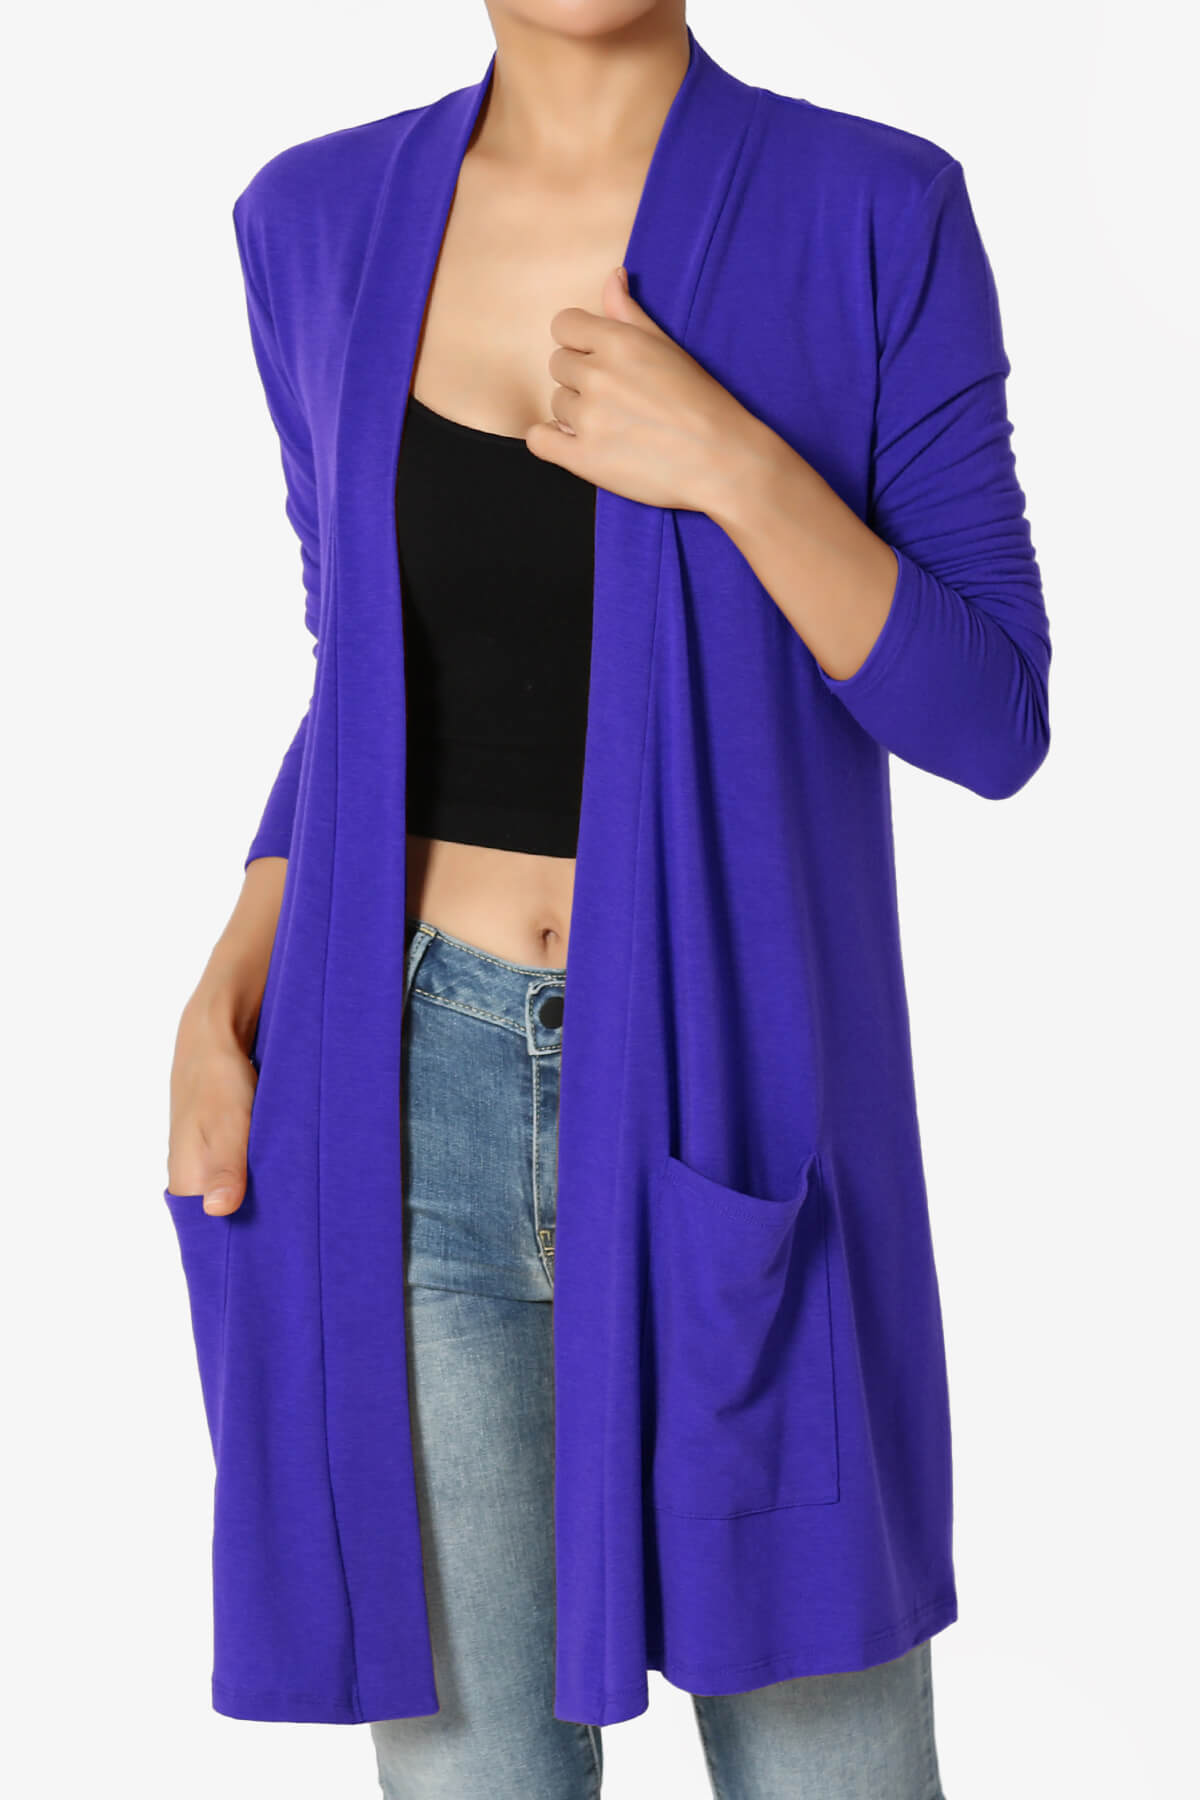 Daday Long Sleeve Pocket Open Front Cardigan BRIGHT BLUE_1